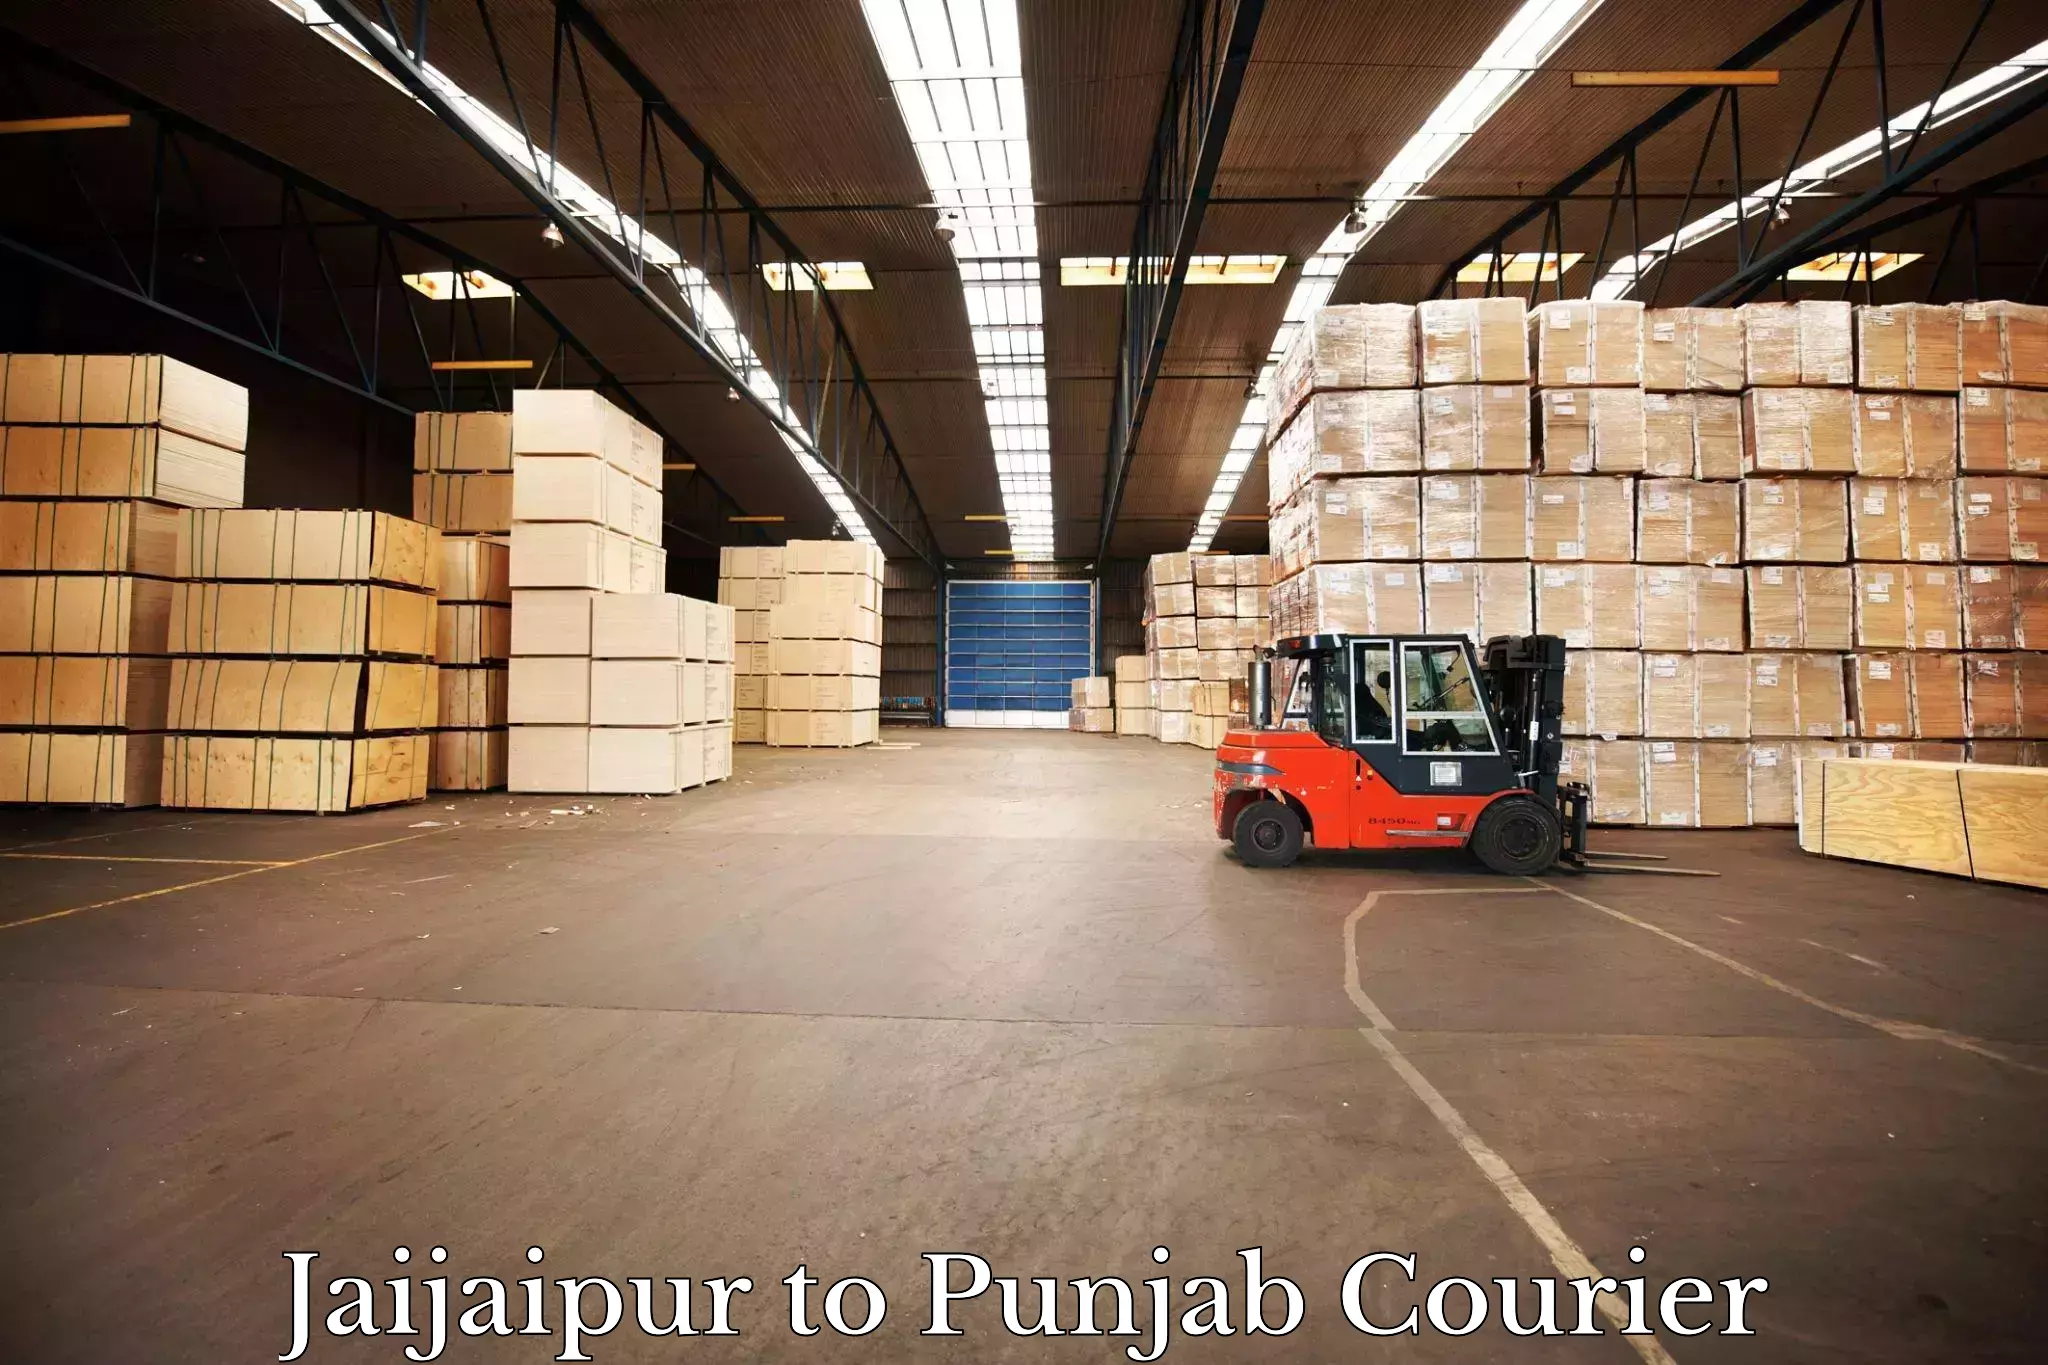 Premium delivery services Jaijaipur to Amritsar